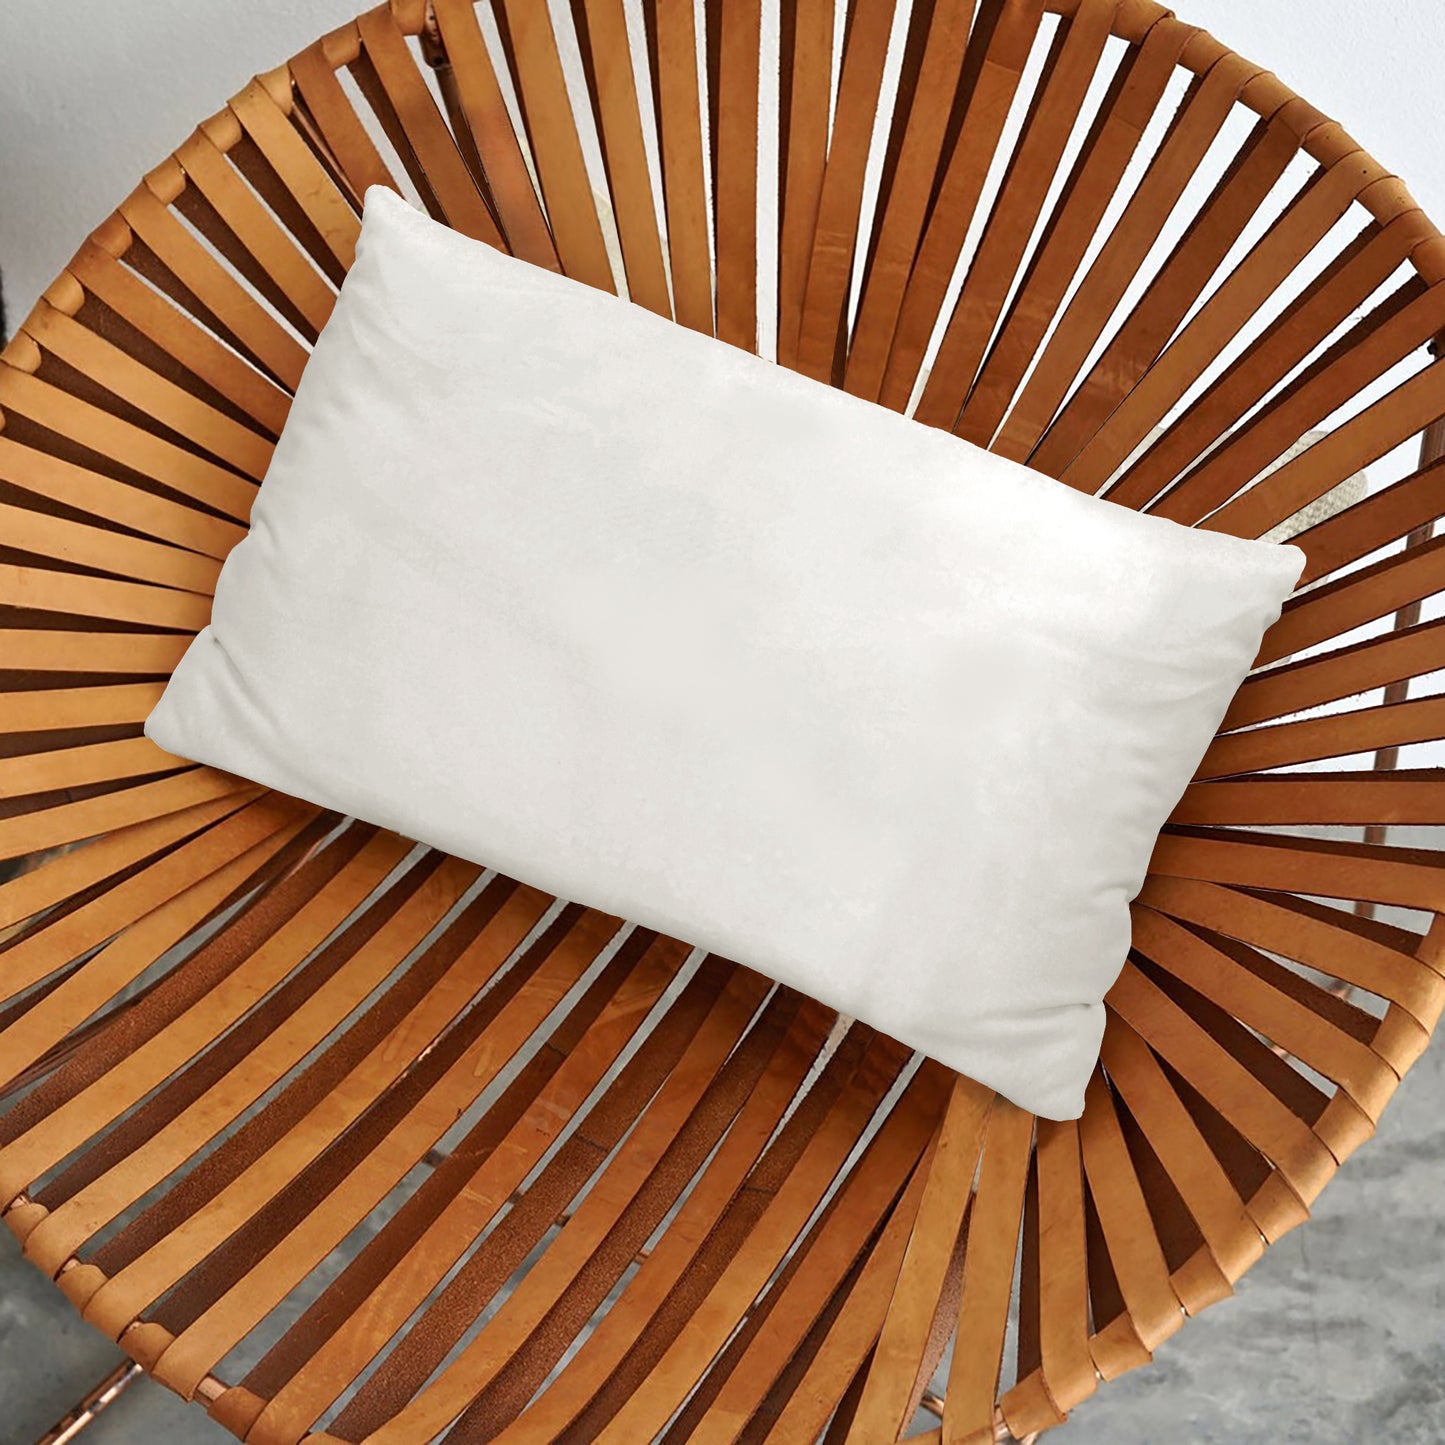 Indoor and outdoor stain-resistant cushion with stain-resistant filling Levante 103 30x50 cm